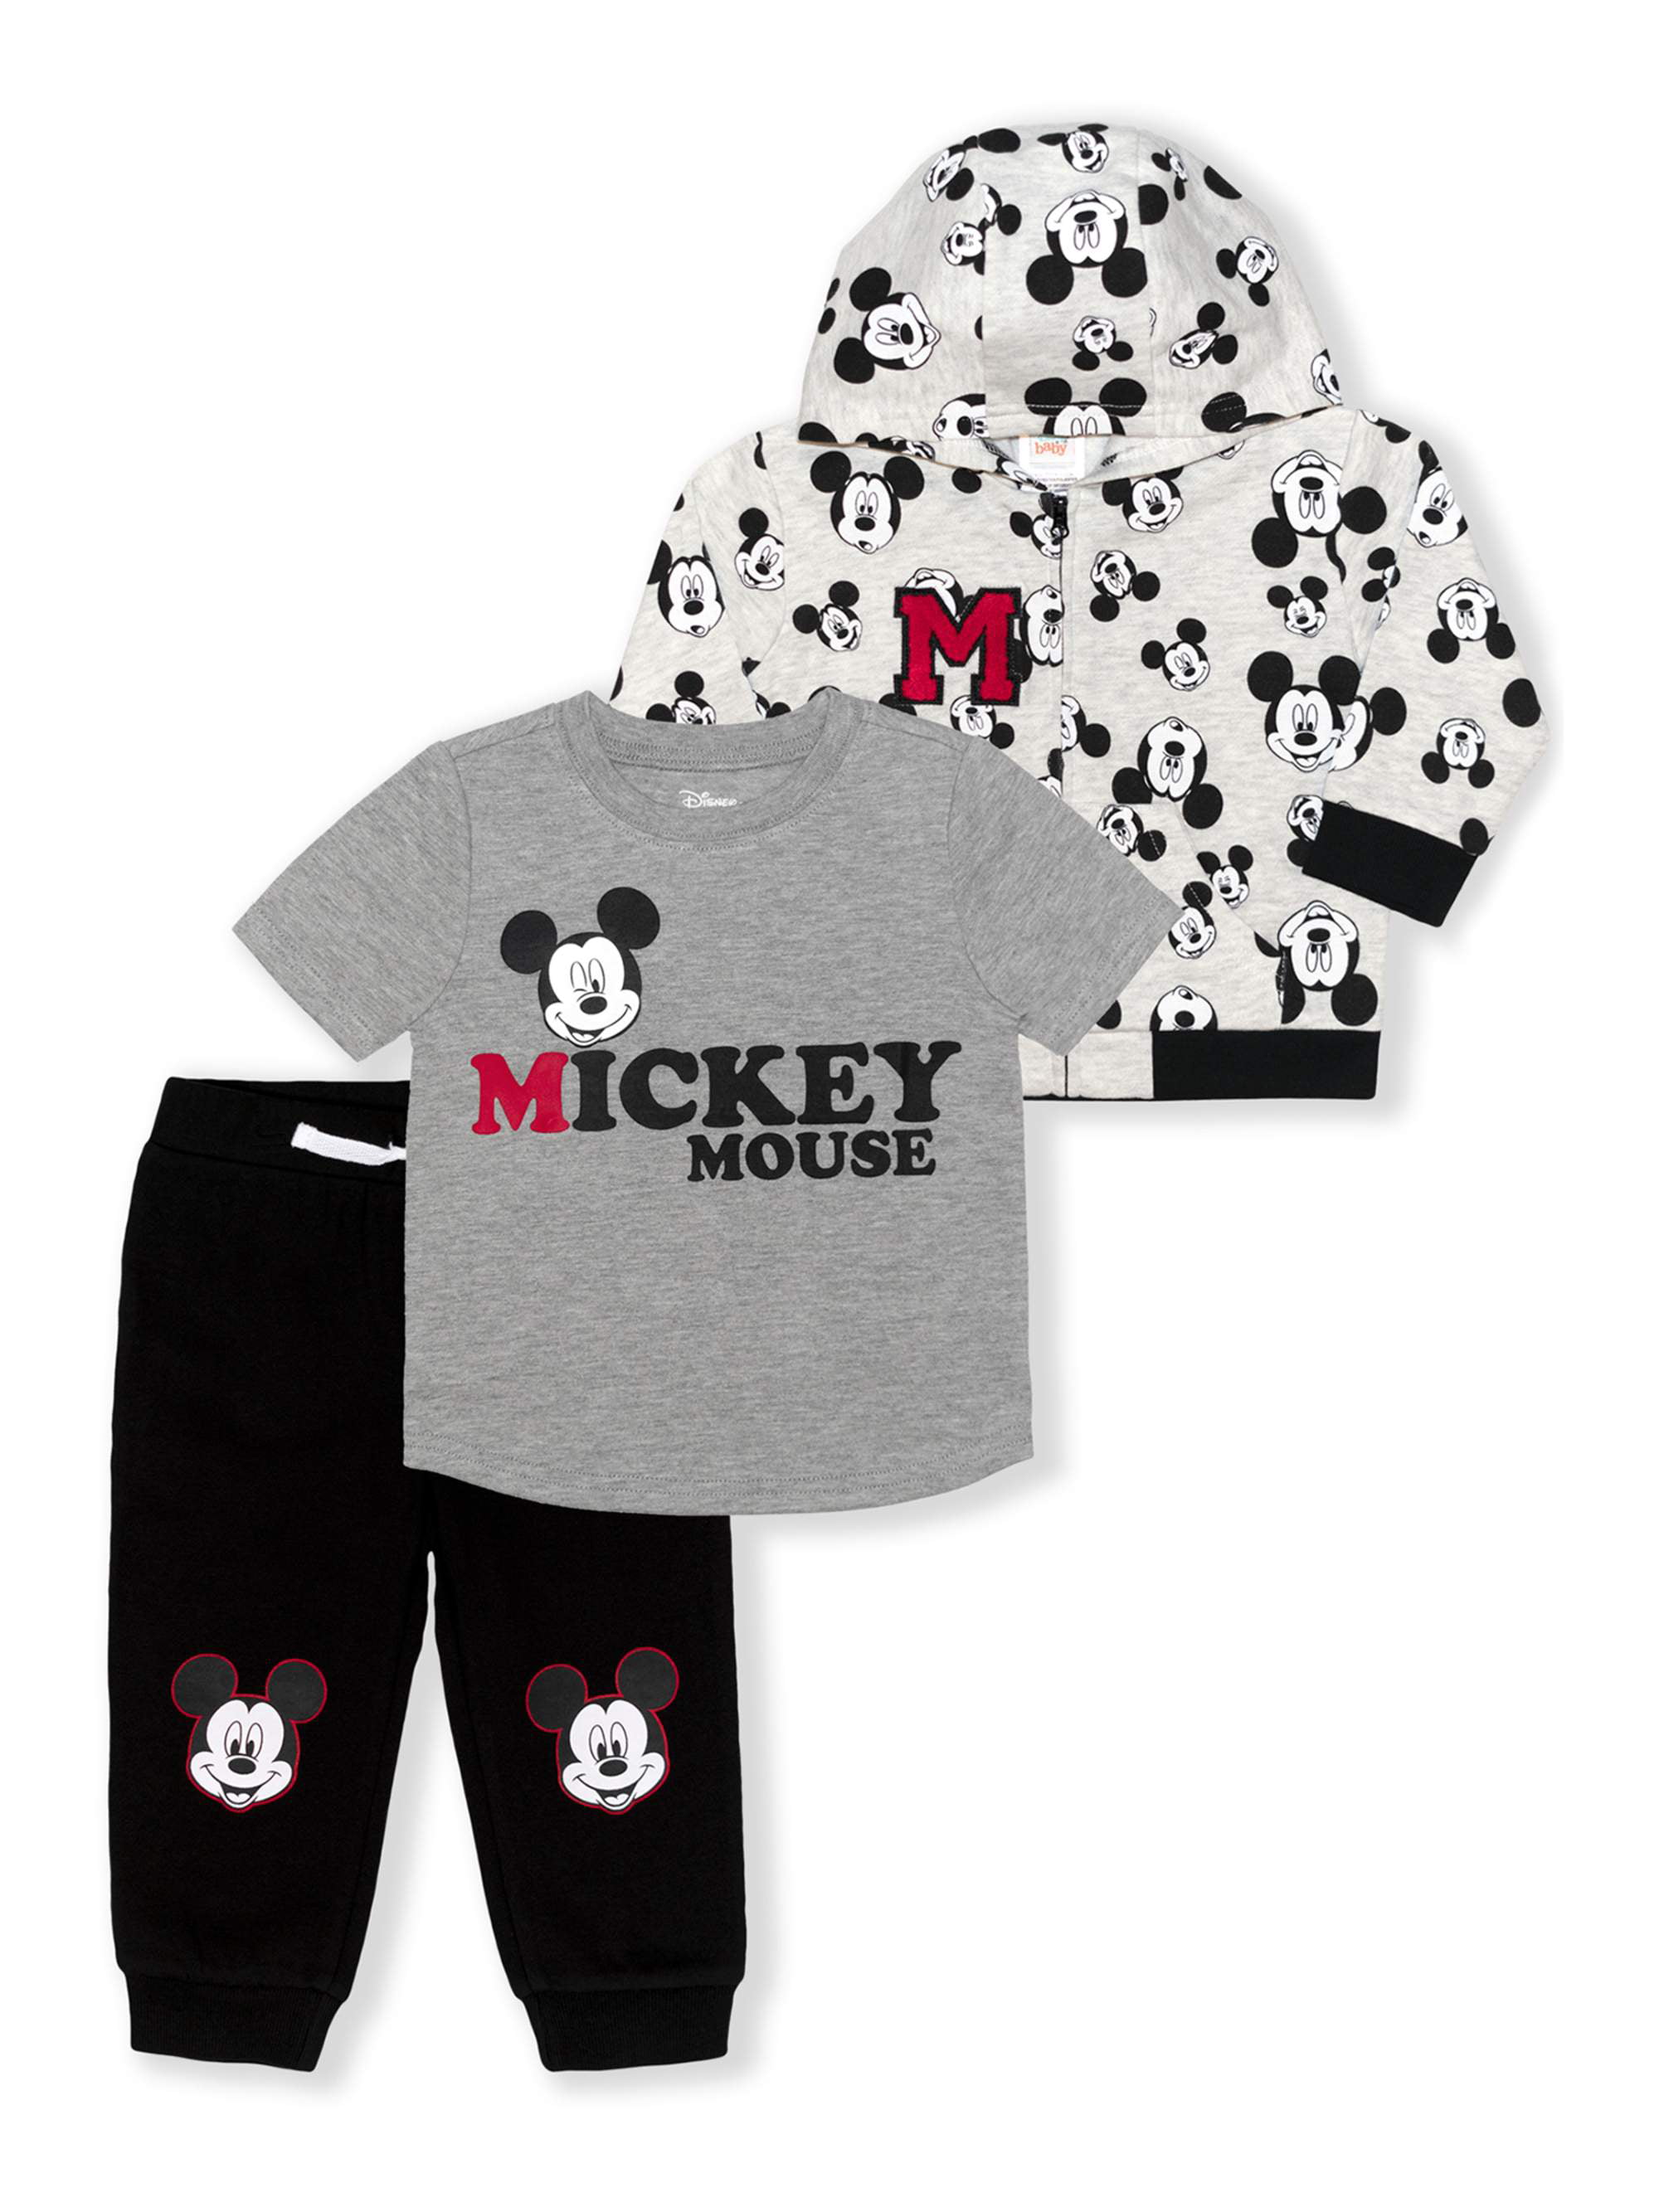 Baby Boys MICKEY MOUSE Characters HoodieTracksuit Outfit Set,3,6,9,6,12,18,23mth 